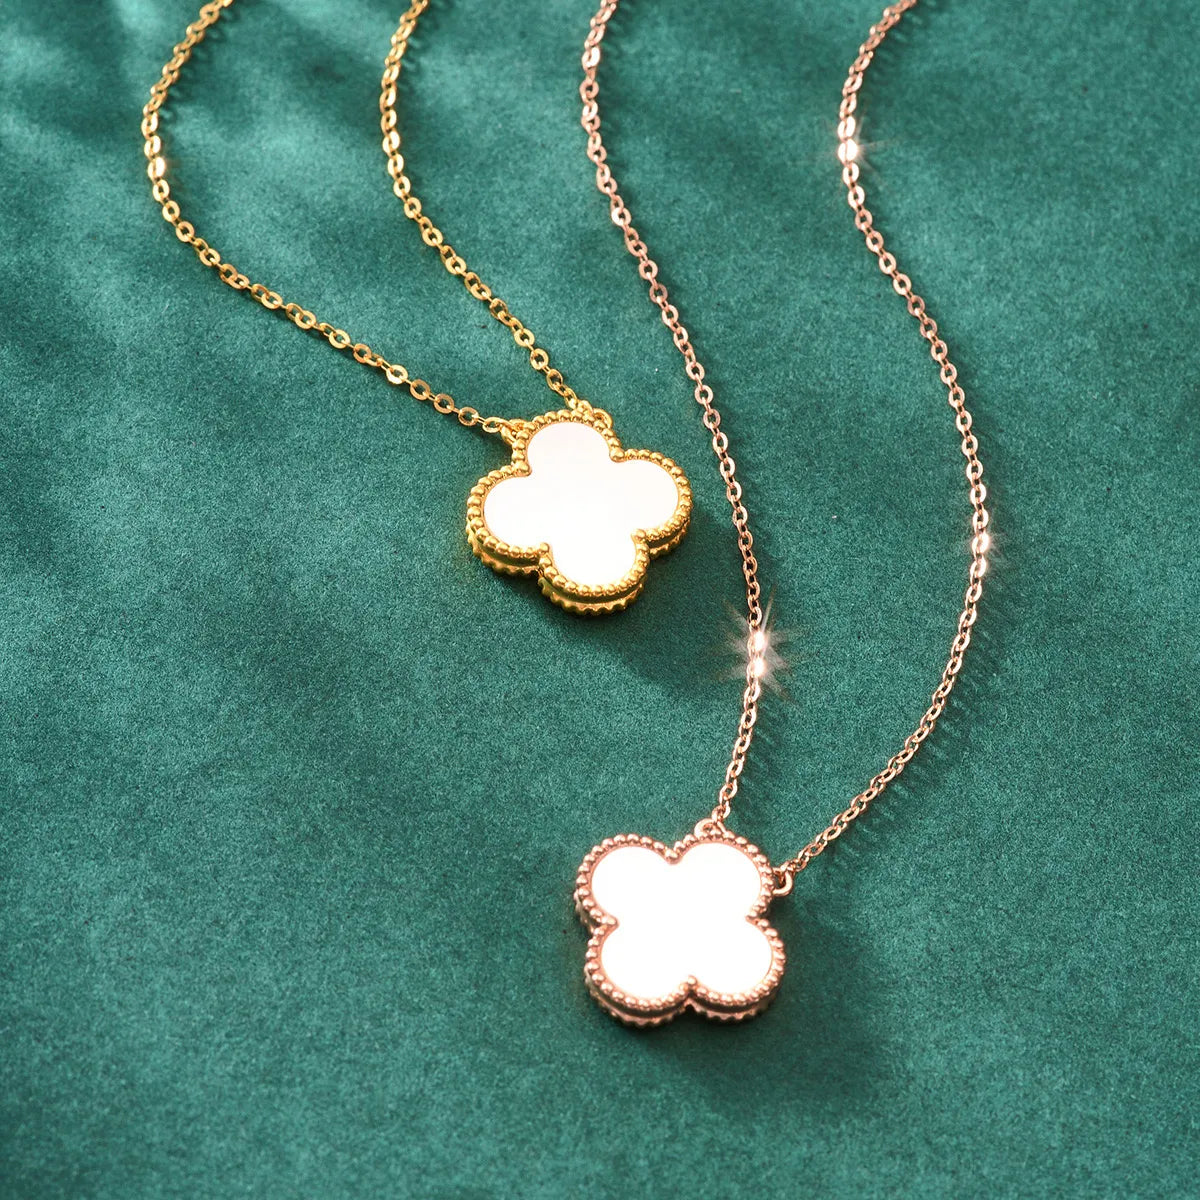 Mother-of-Pearl Clover Necklace – Charm of Luck, 18K Gold